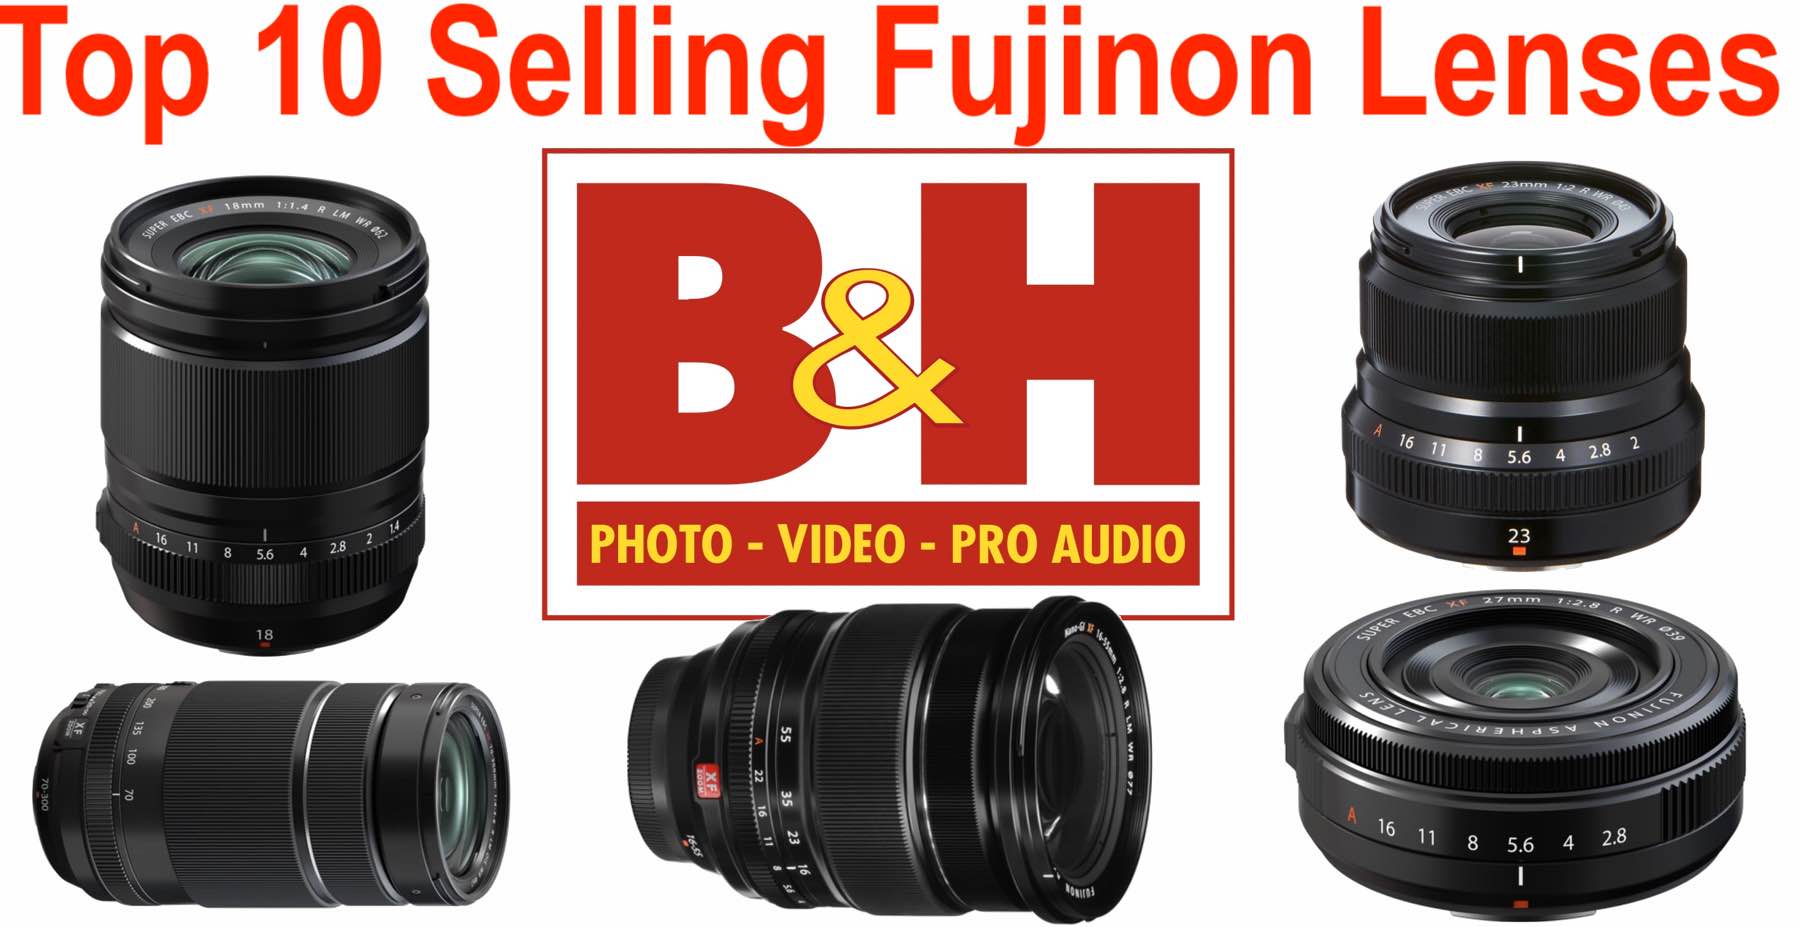 Top 10 Best Selling Fujinon XF Lenses at BHphoto in the Last 12